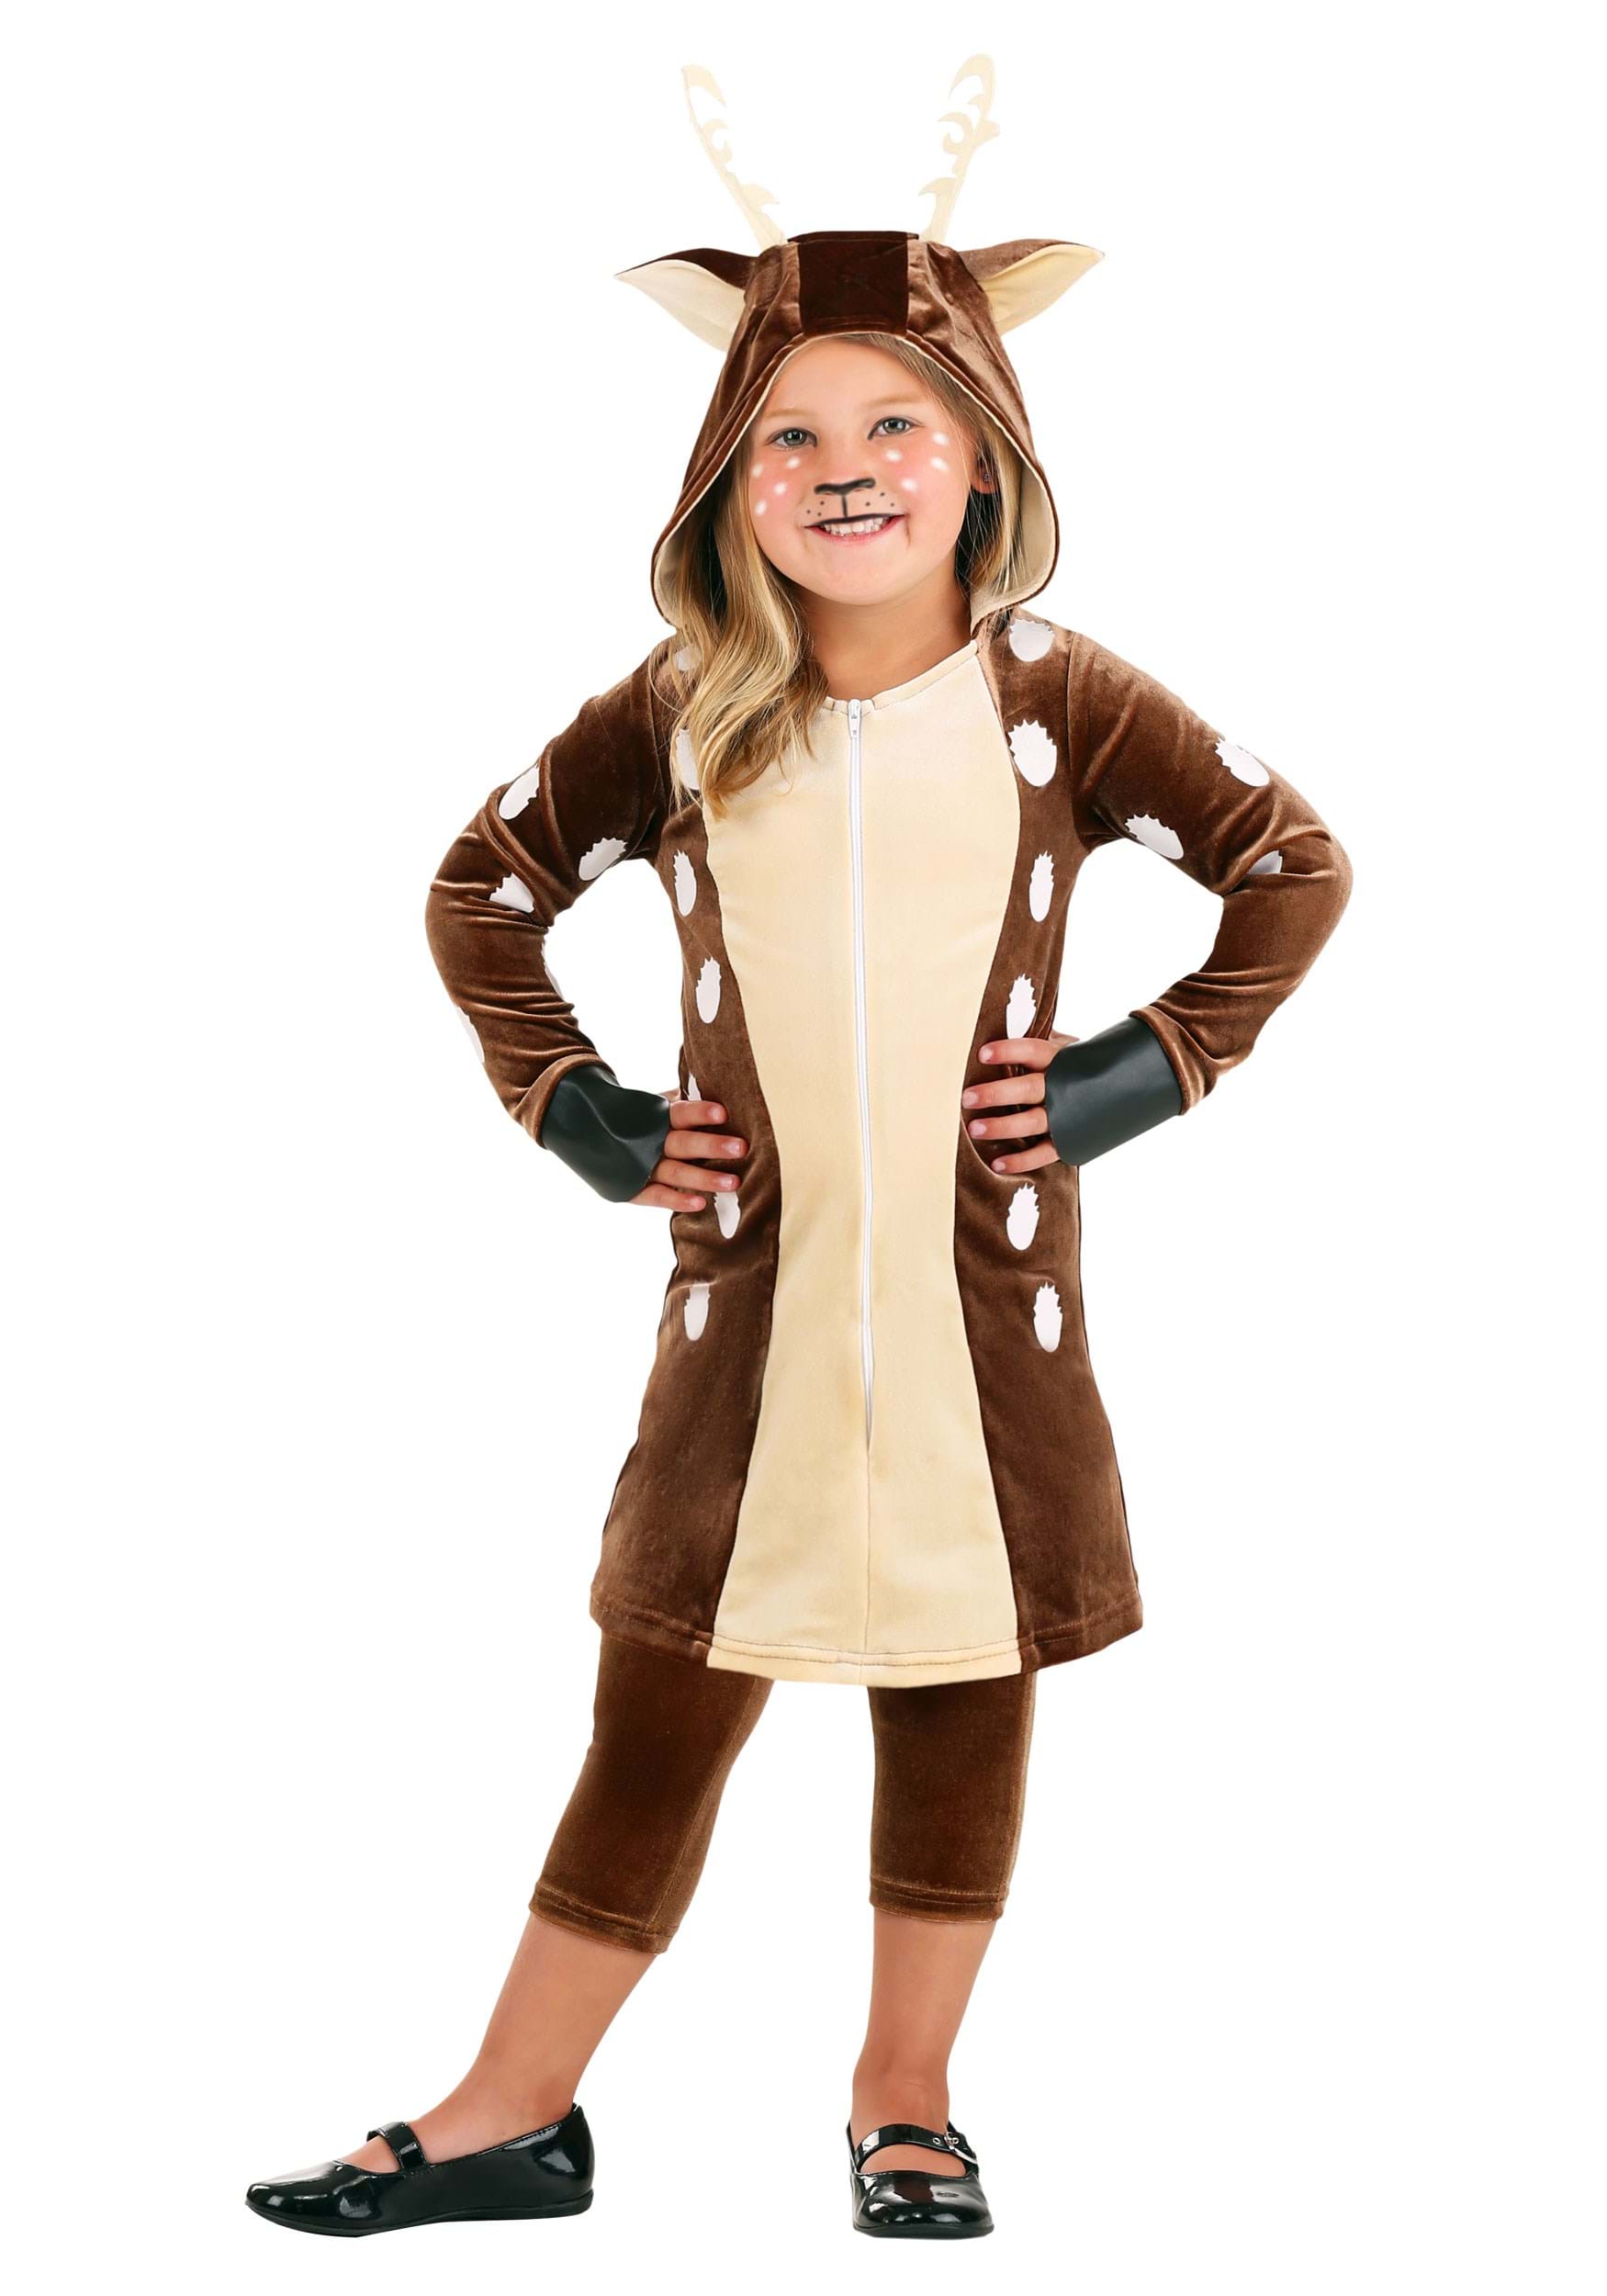 Photos - Fancy Dress FUN Costumes Fawn Costume for Toddlers Brown FUN2885TD